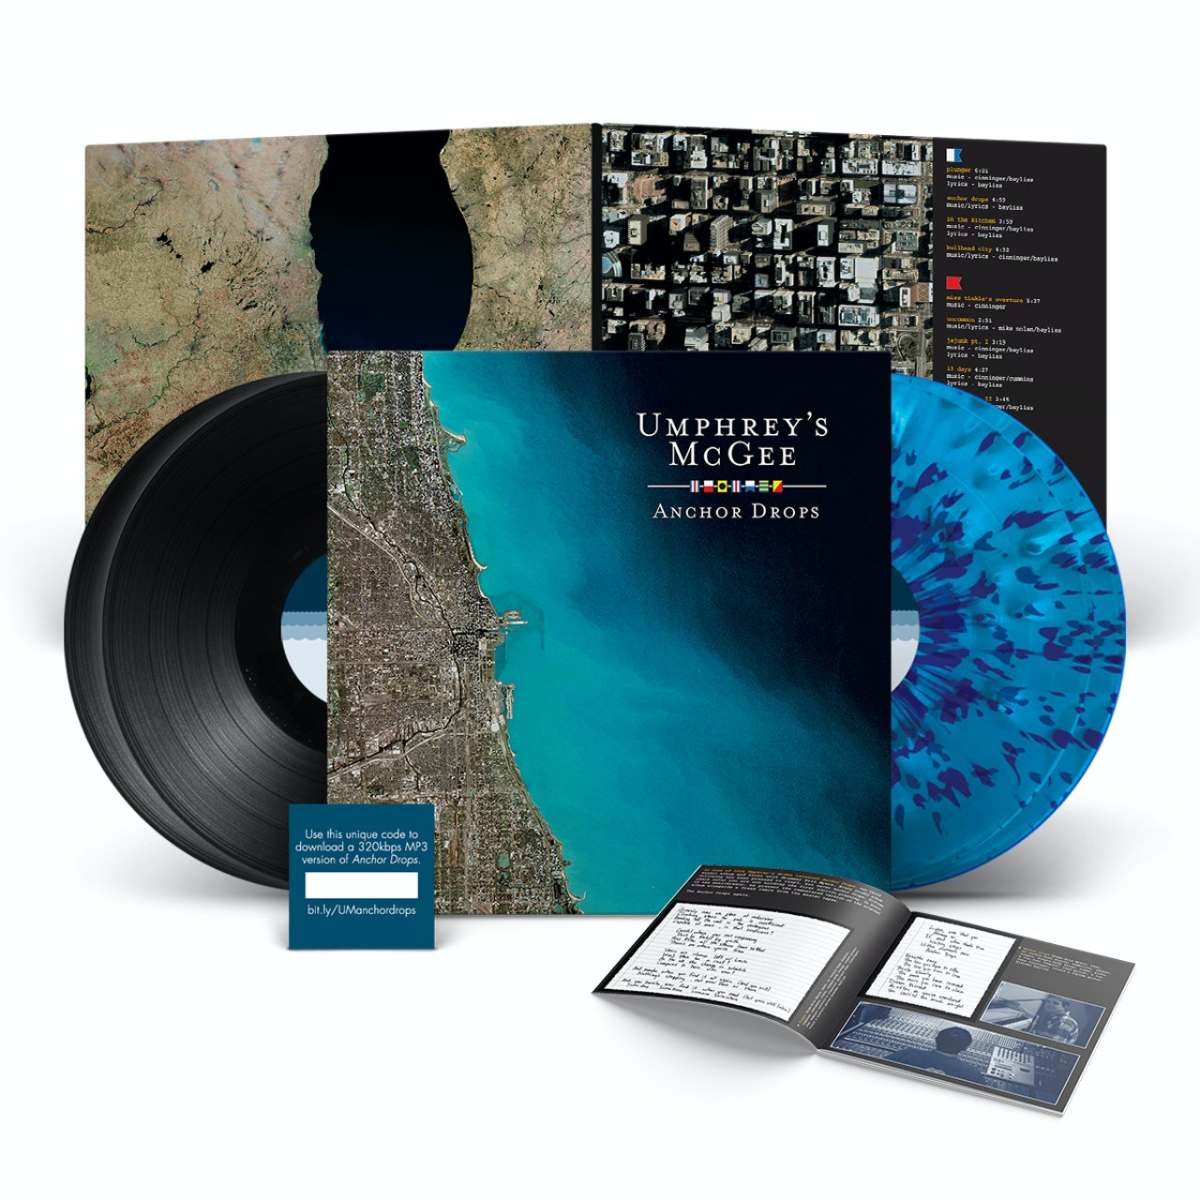 Get Umphrey's McGee bestselling album of all time in a deluxe blue splatter set!